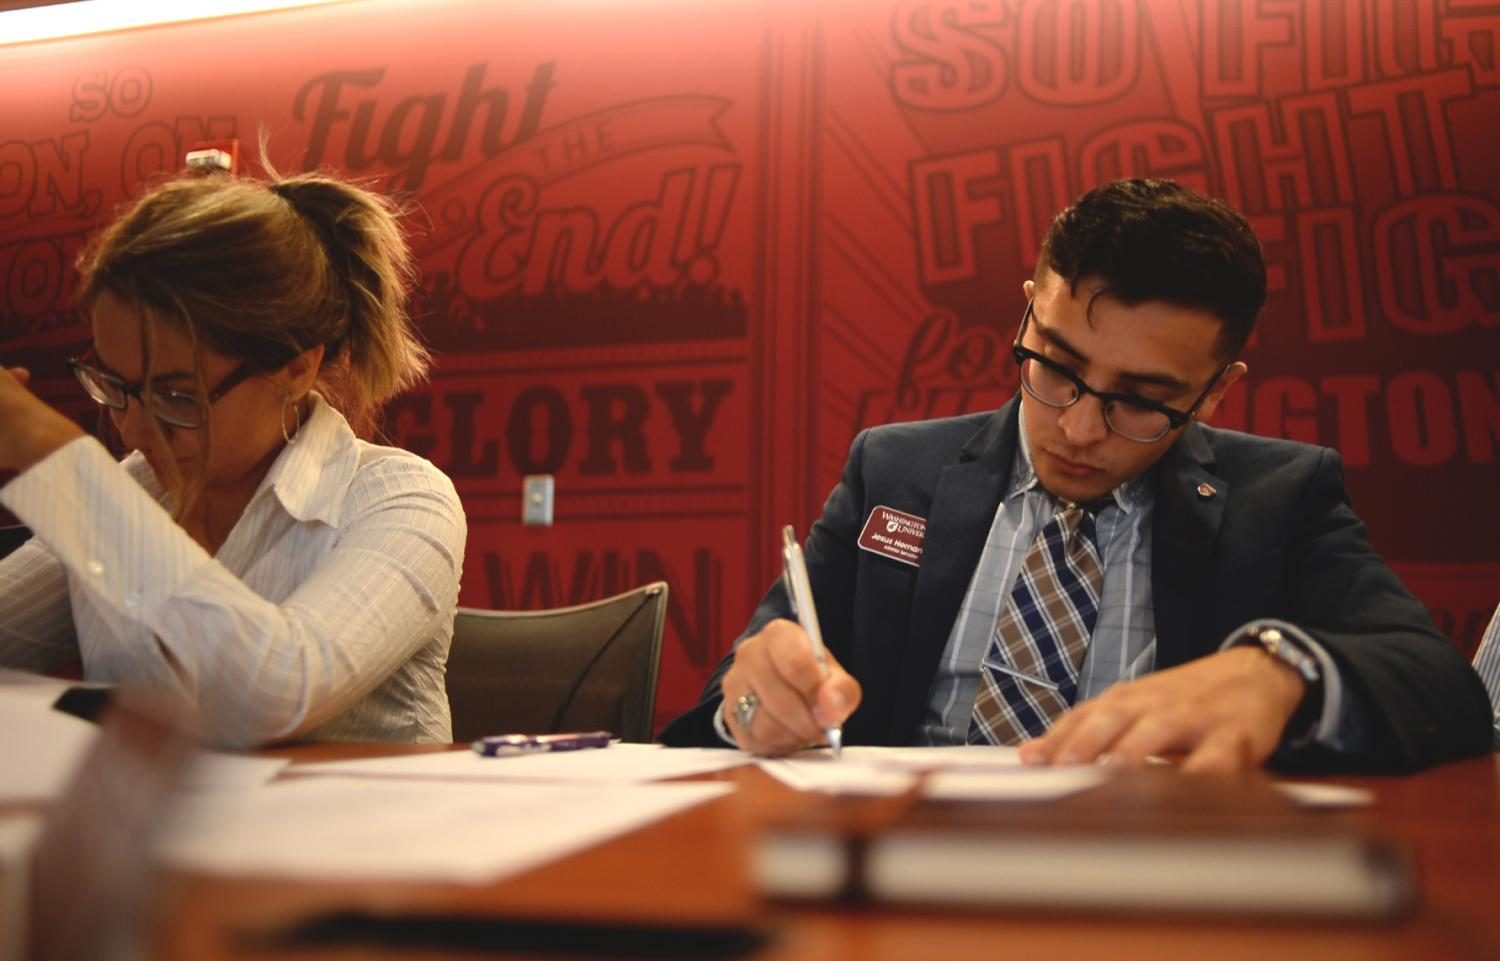 Jesus Herdnandez, Carson College senator, takes notes while listening to a speaker at the first ASWSU senate meeting of the fall semester on Wednesday at the CUB.
